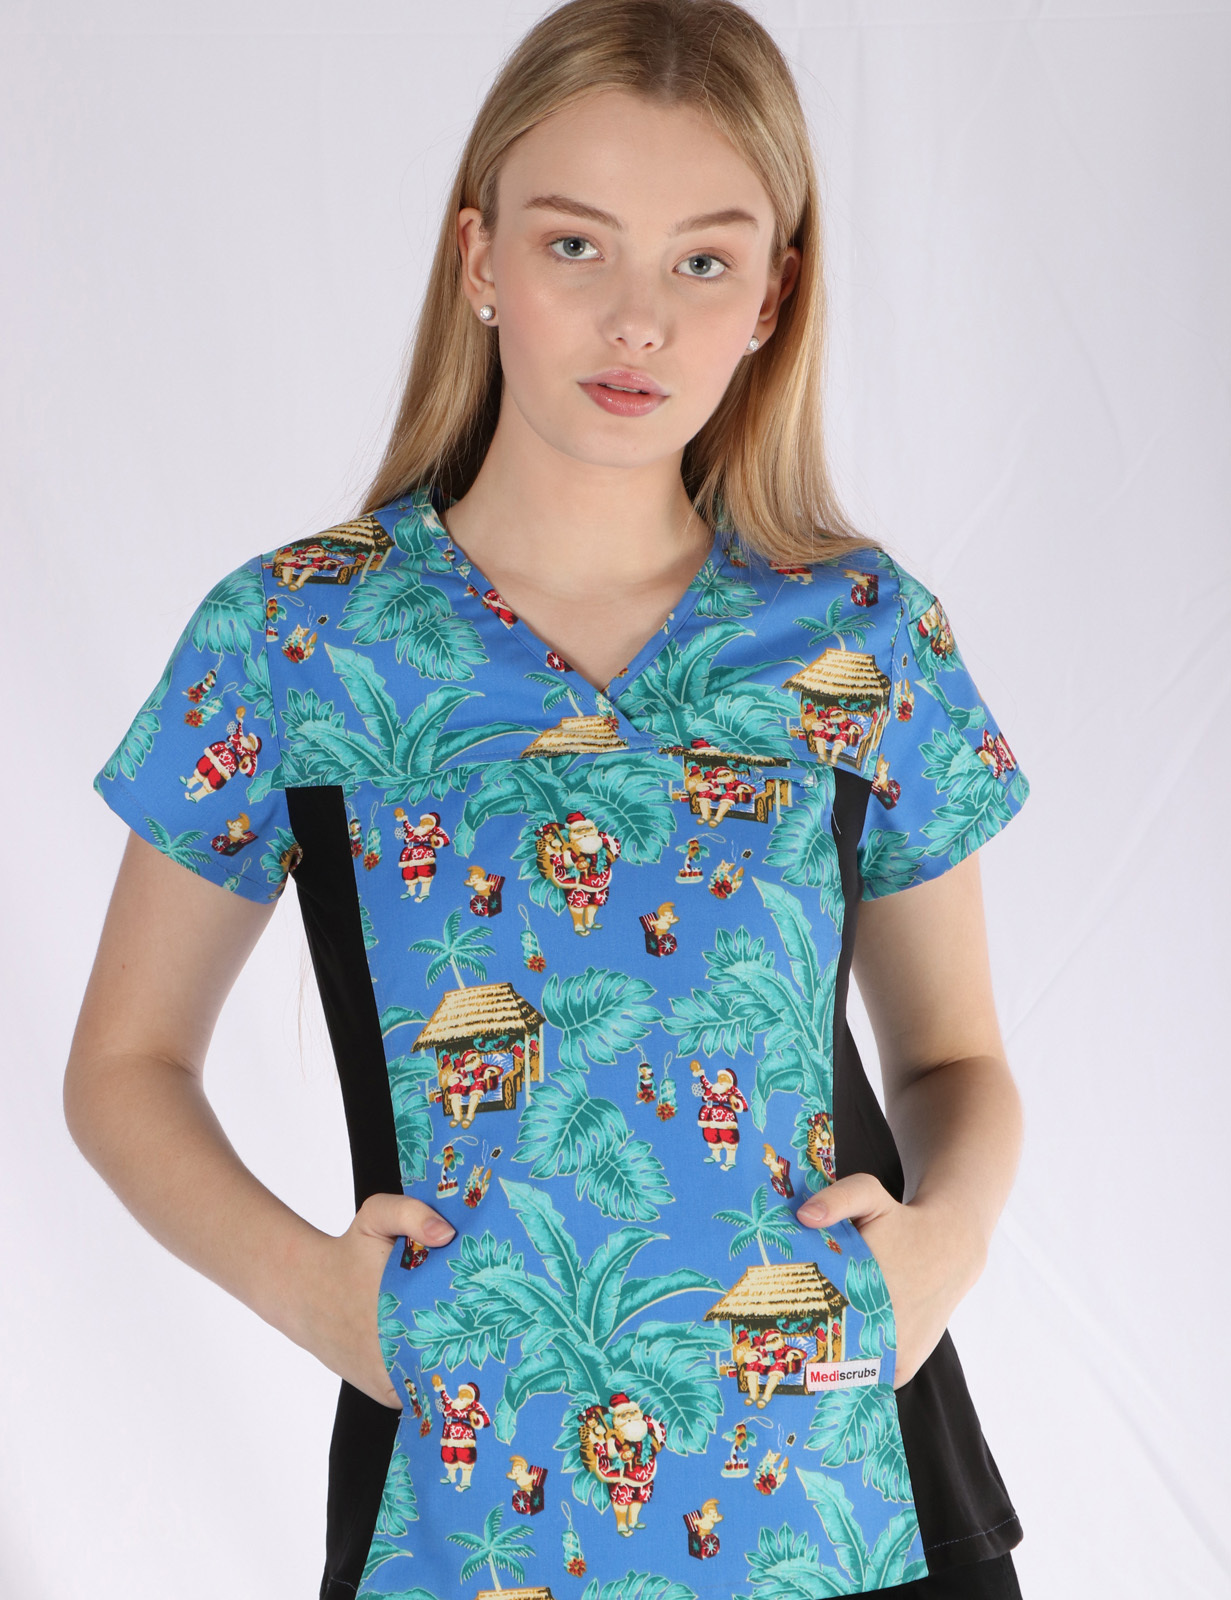 Women's Fit Solid Print Scrub Top With Spandex Panel - Santa's Tropical Vacation